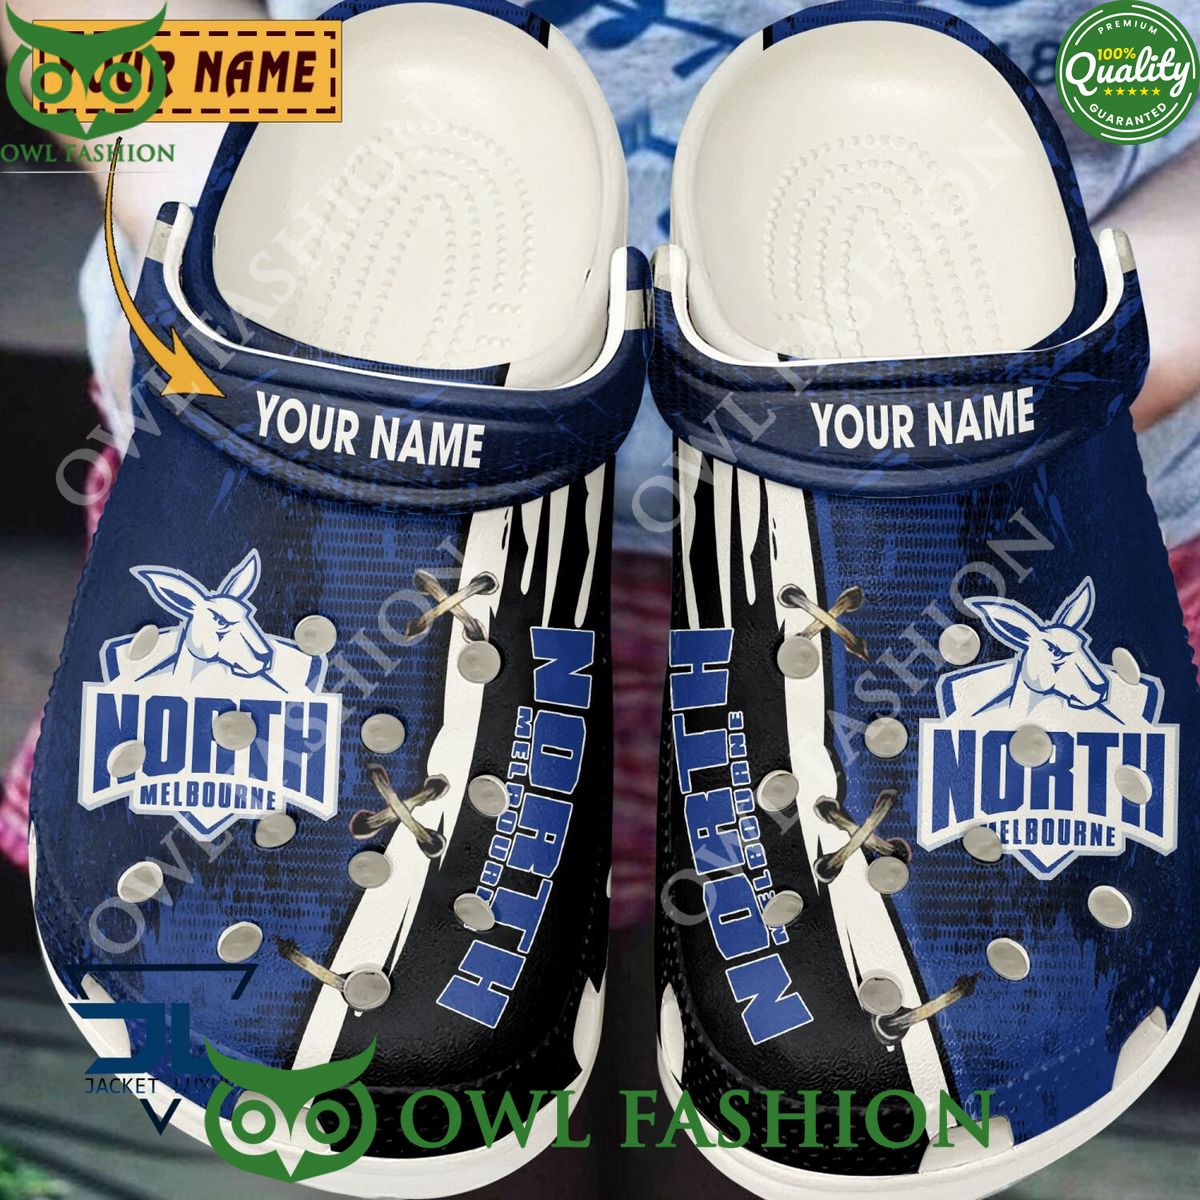 North Melbourne Football Club New Personalized Crocs